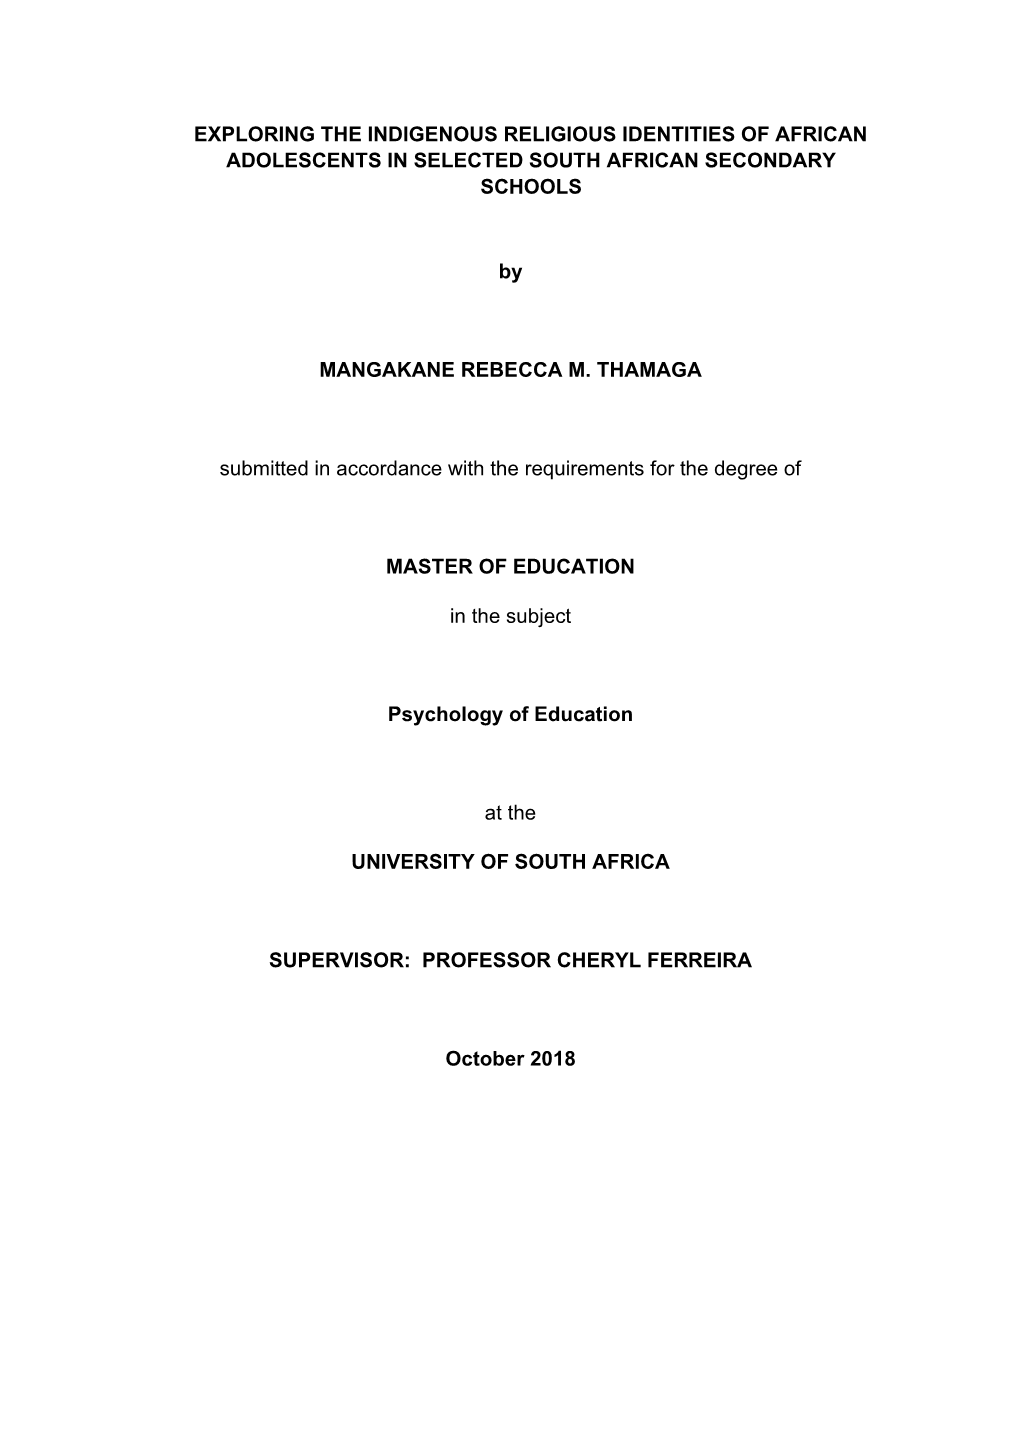 Exploring the Indigenous Religious Identities of African Adolescents in Selected South African Secondary Schools